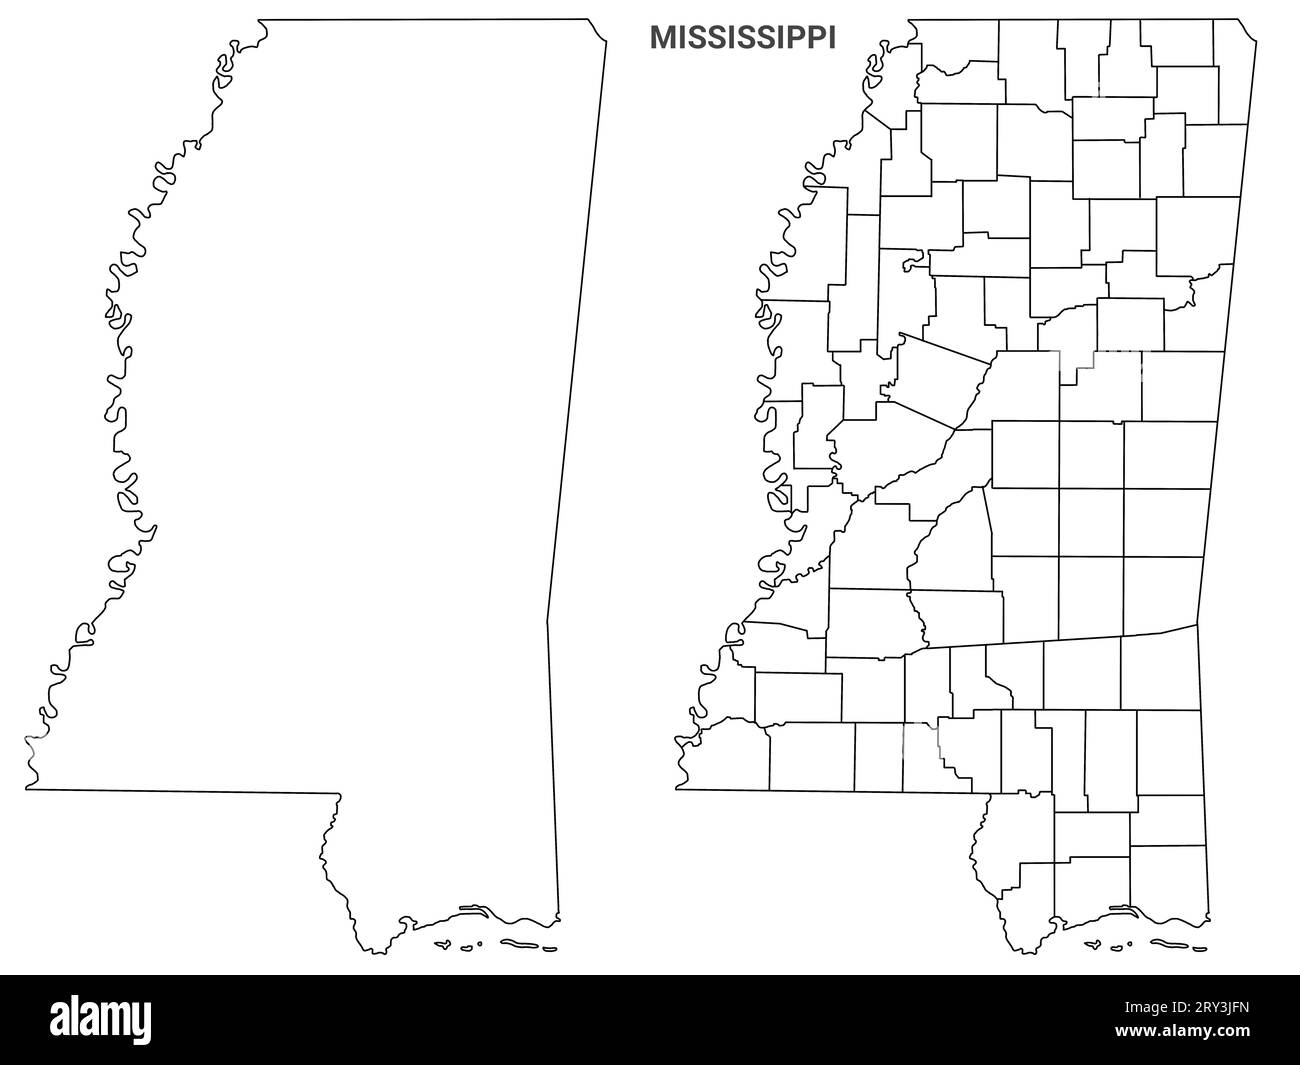 Mississippi counties outline map set - illustration version Stock Photo